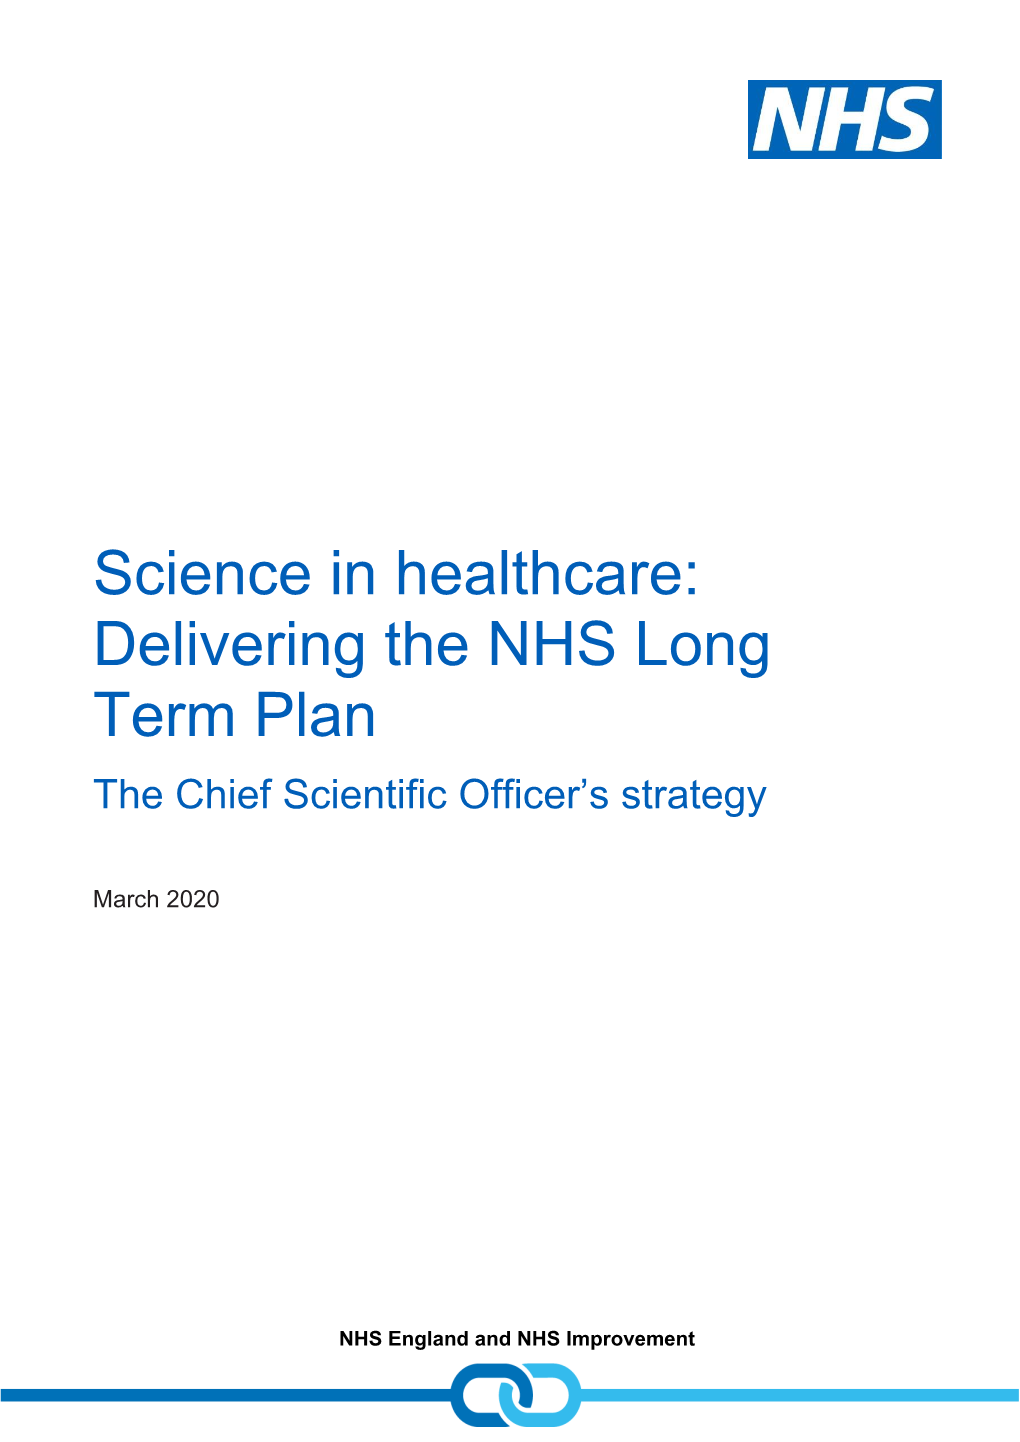 Science in Healthcare: Delivering the NHS Long Term Plan the Chief Scientific Officer’S Strategy